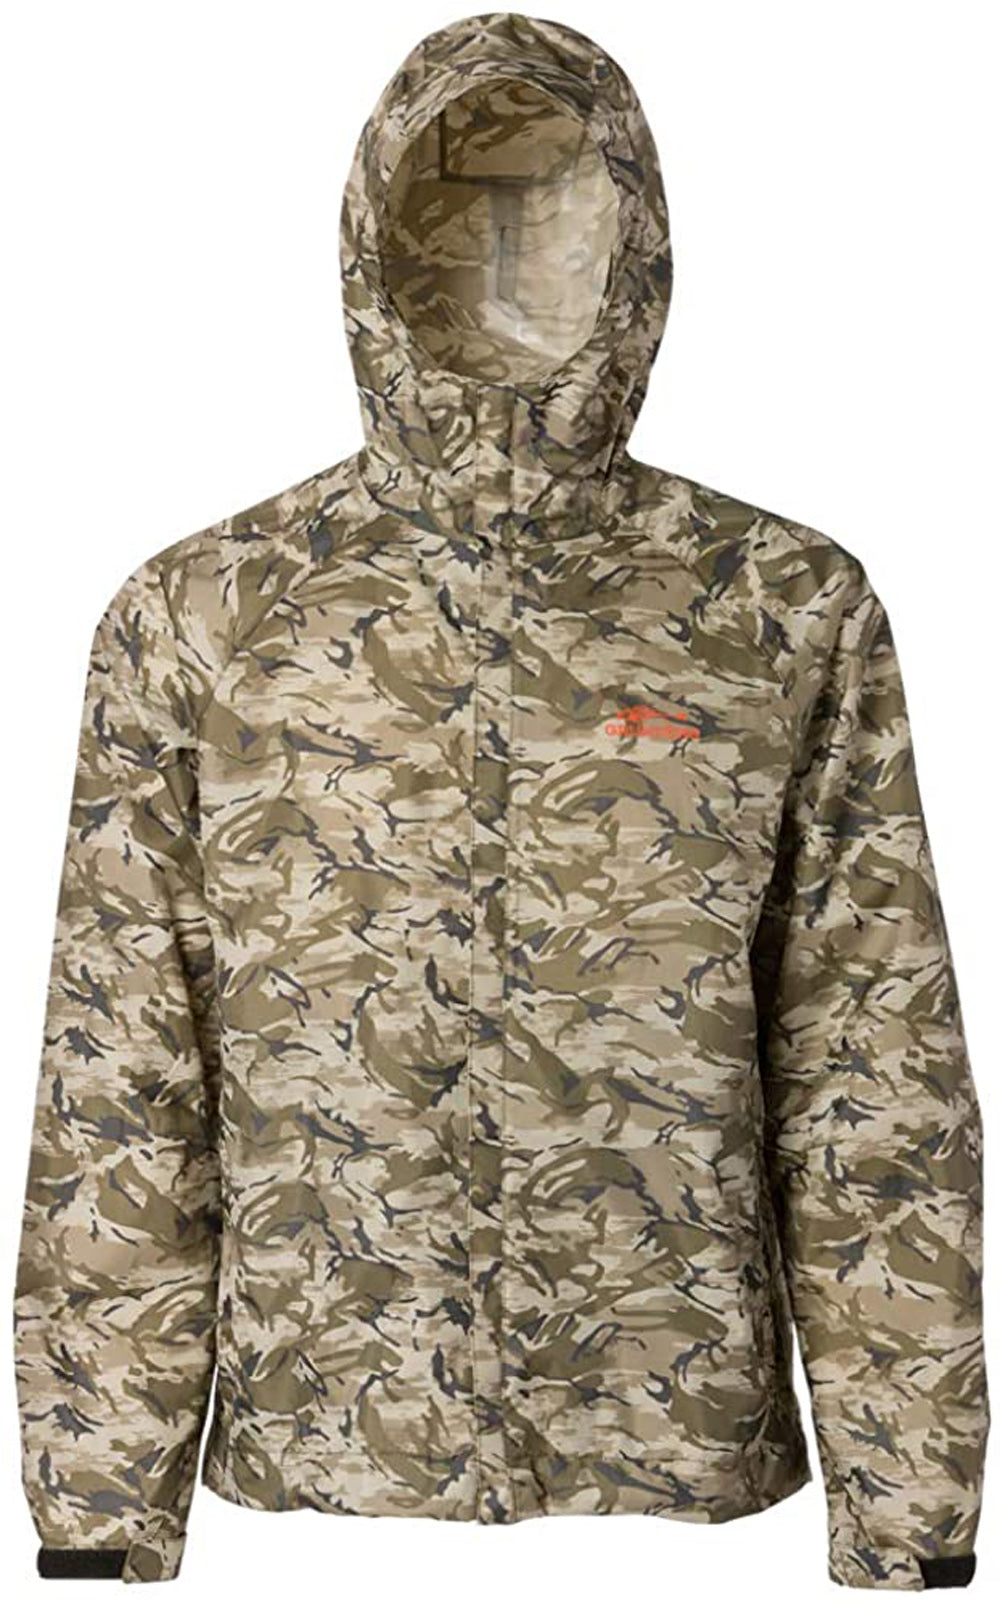 Weather Watch Jacket in Refraction Camo Stone color from the front view